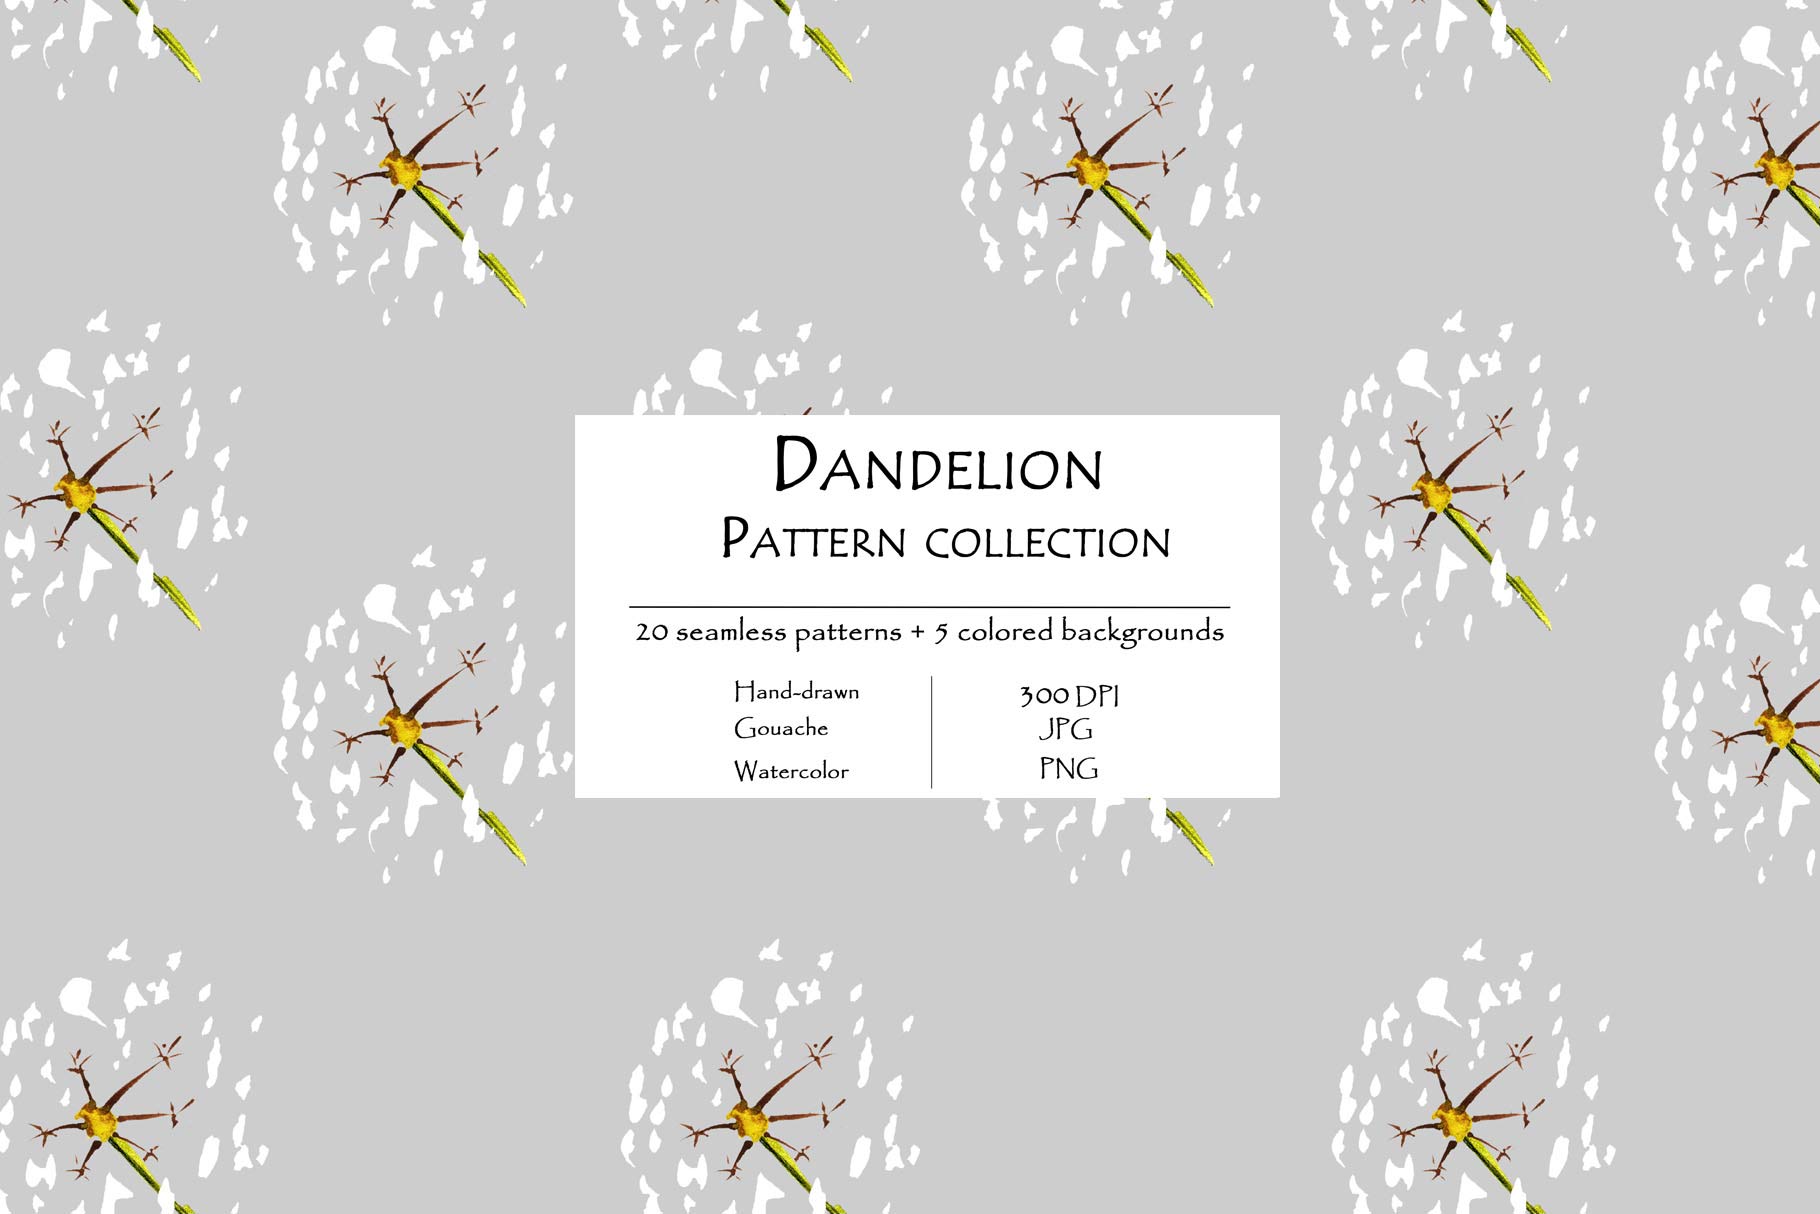 Dandelion Pattern Collection Of 20 Seamless Patterns And 5 Colored Background Grey Background.